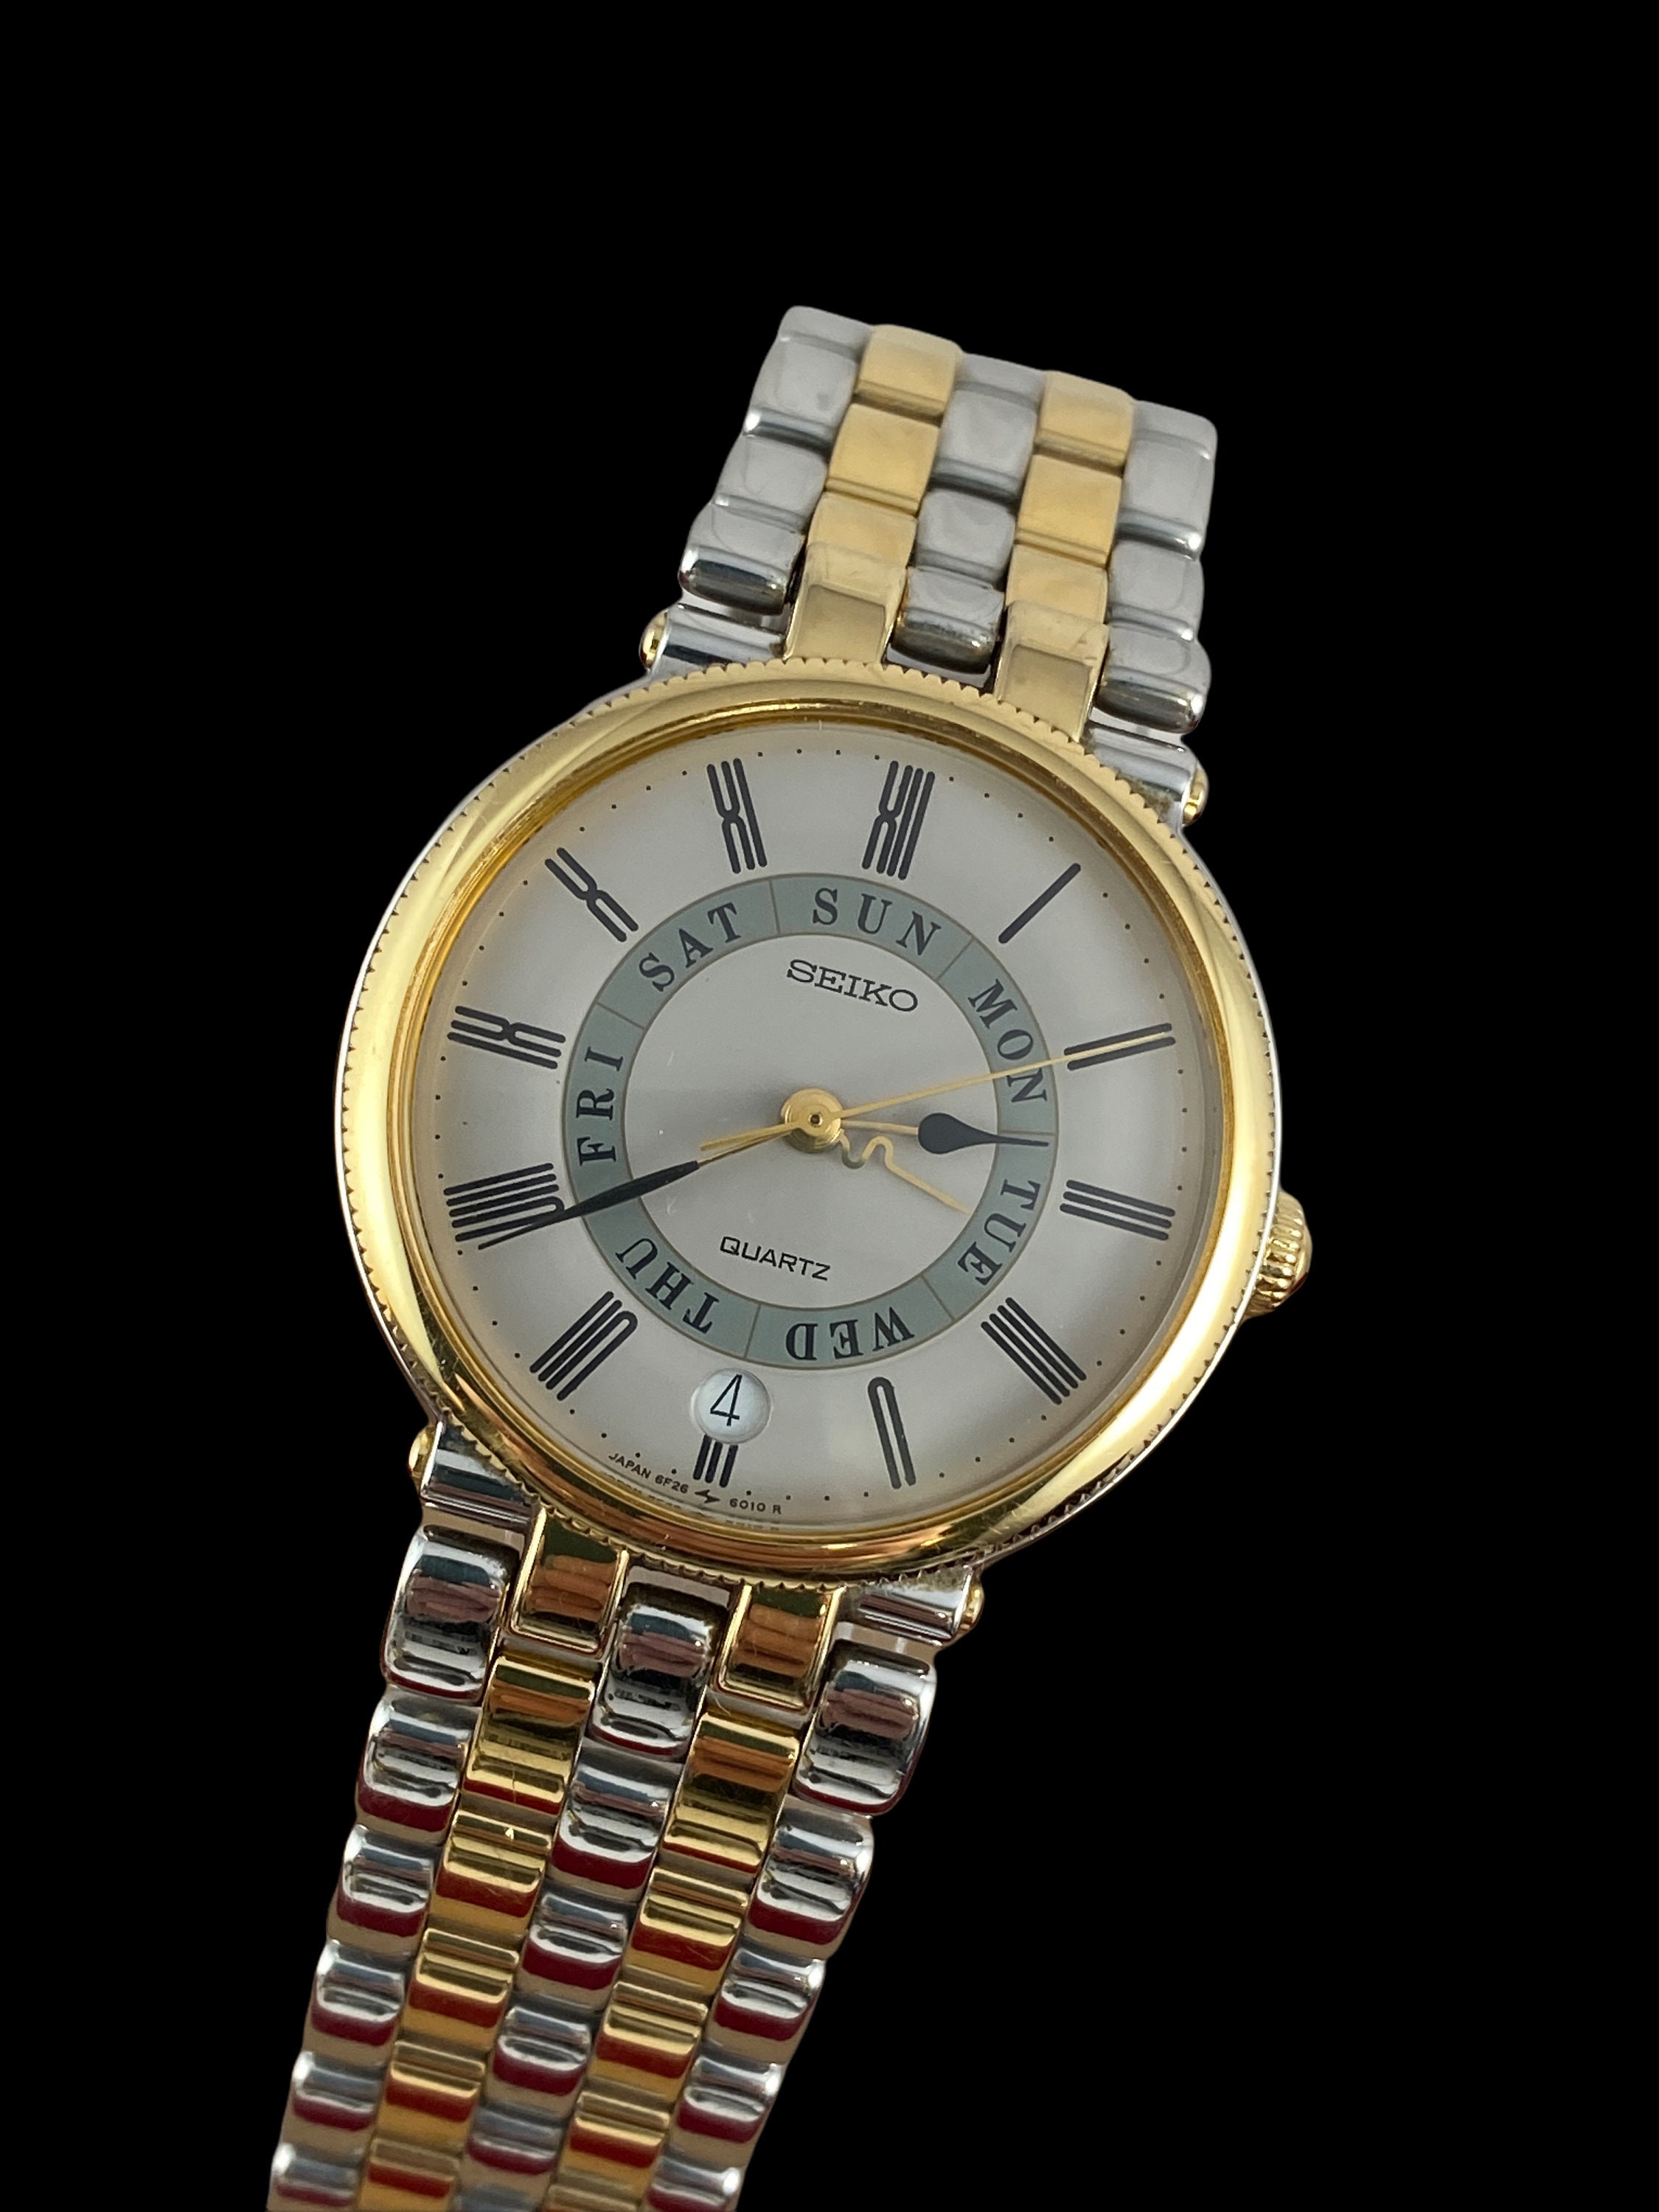 Vintage Extremely Rare SEIKO 2 Tone Gold and Silver Watch. Has - Etsy Sweden